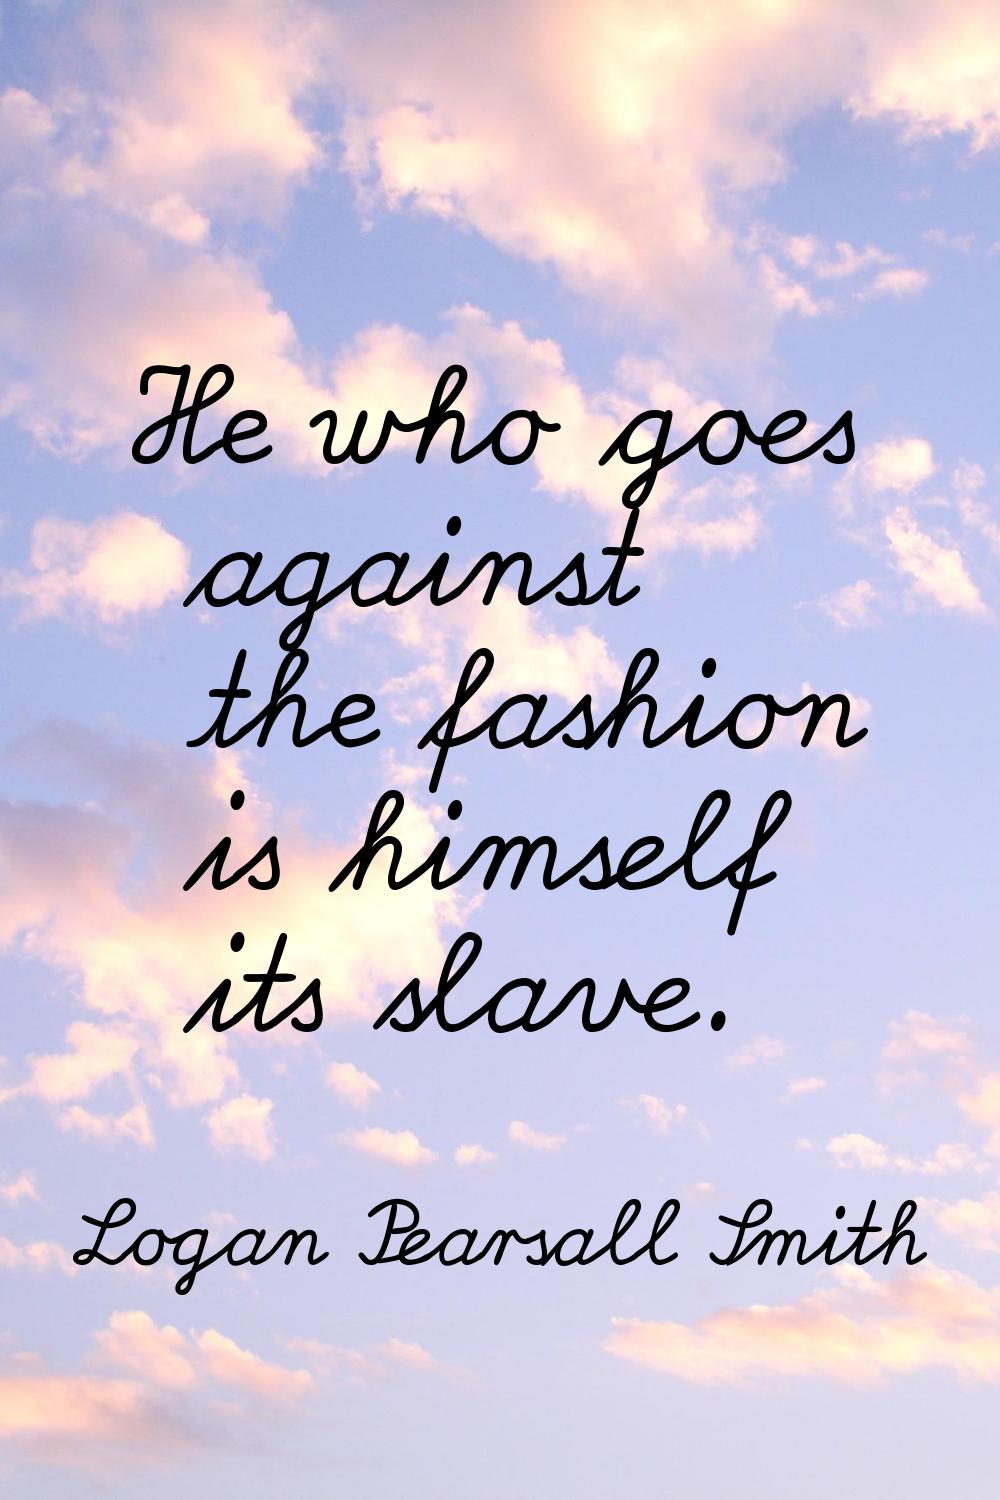 He who goes against the fashion is himself its slave.